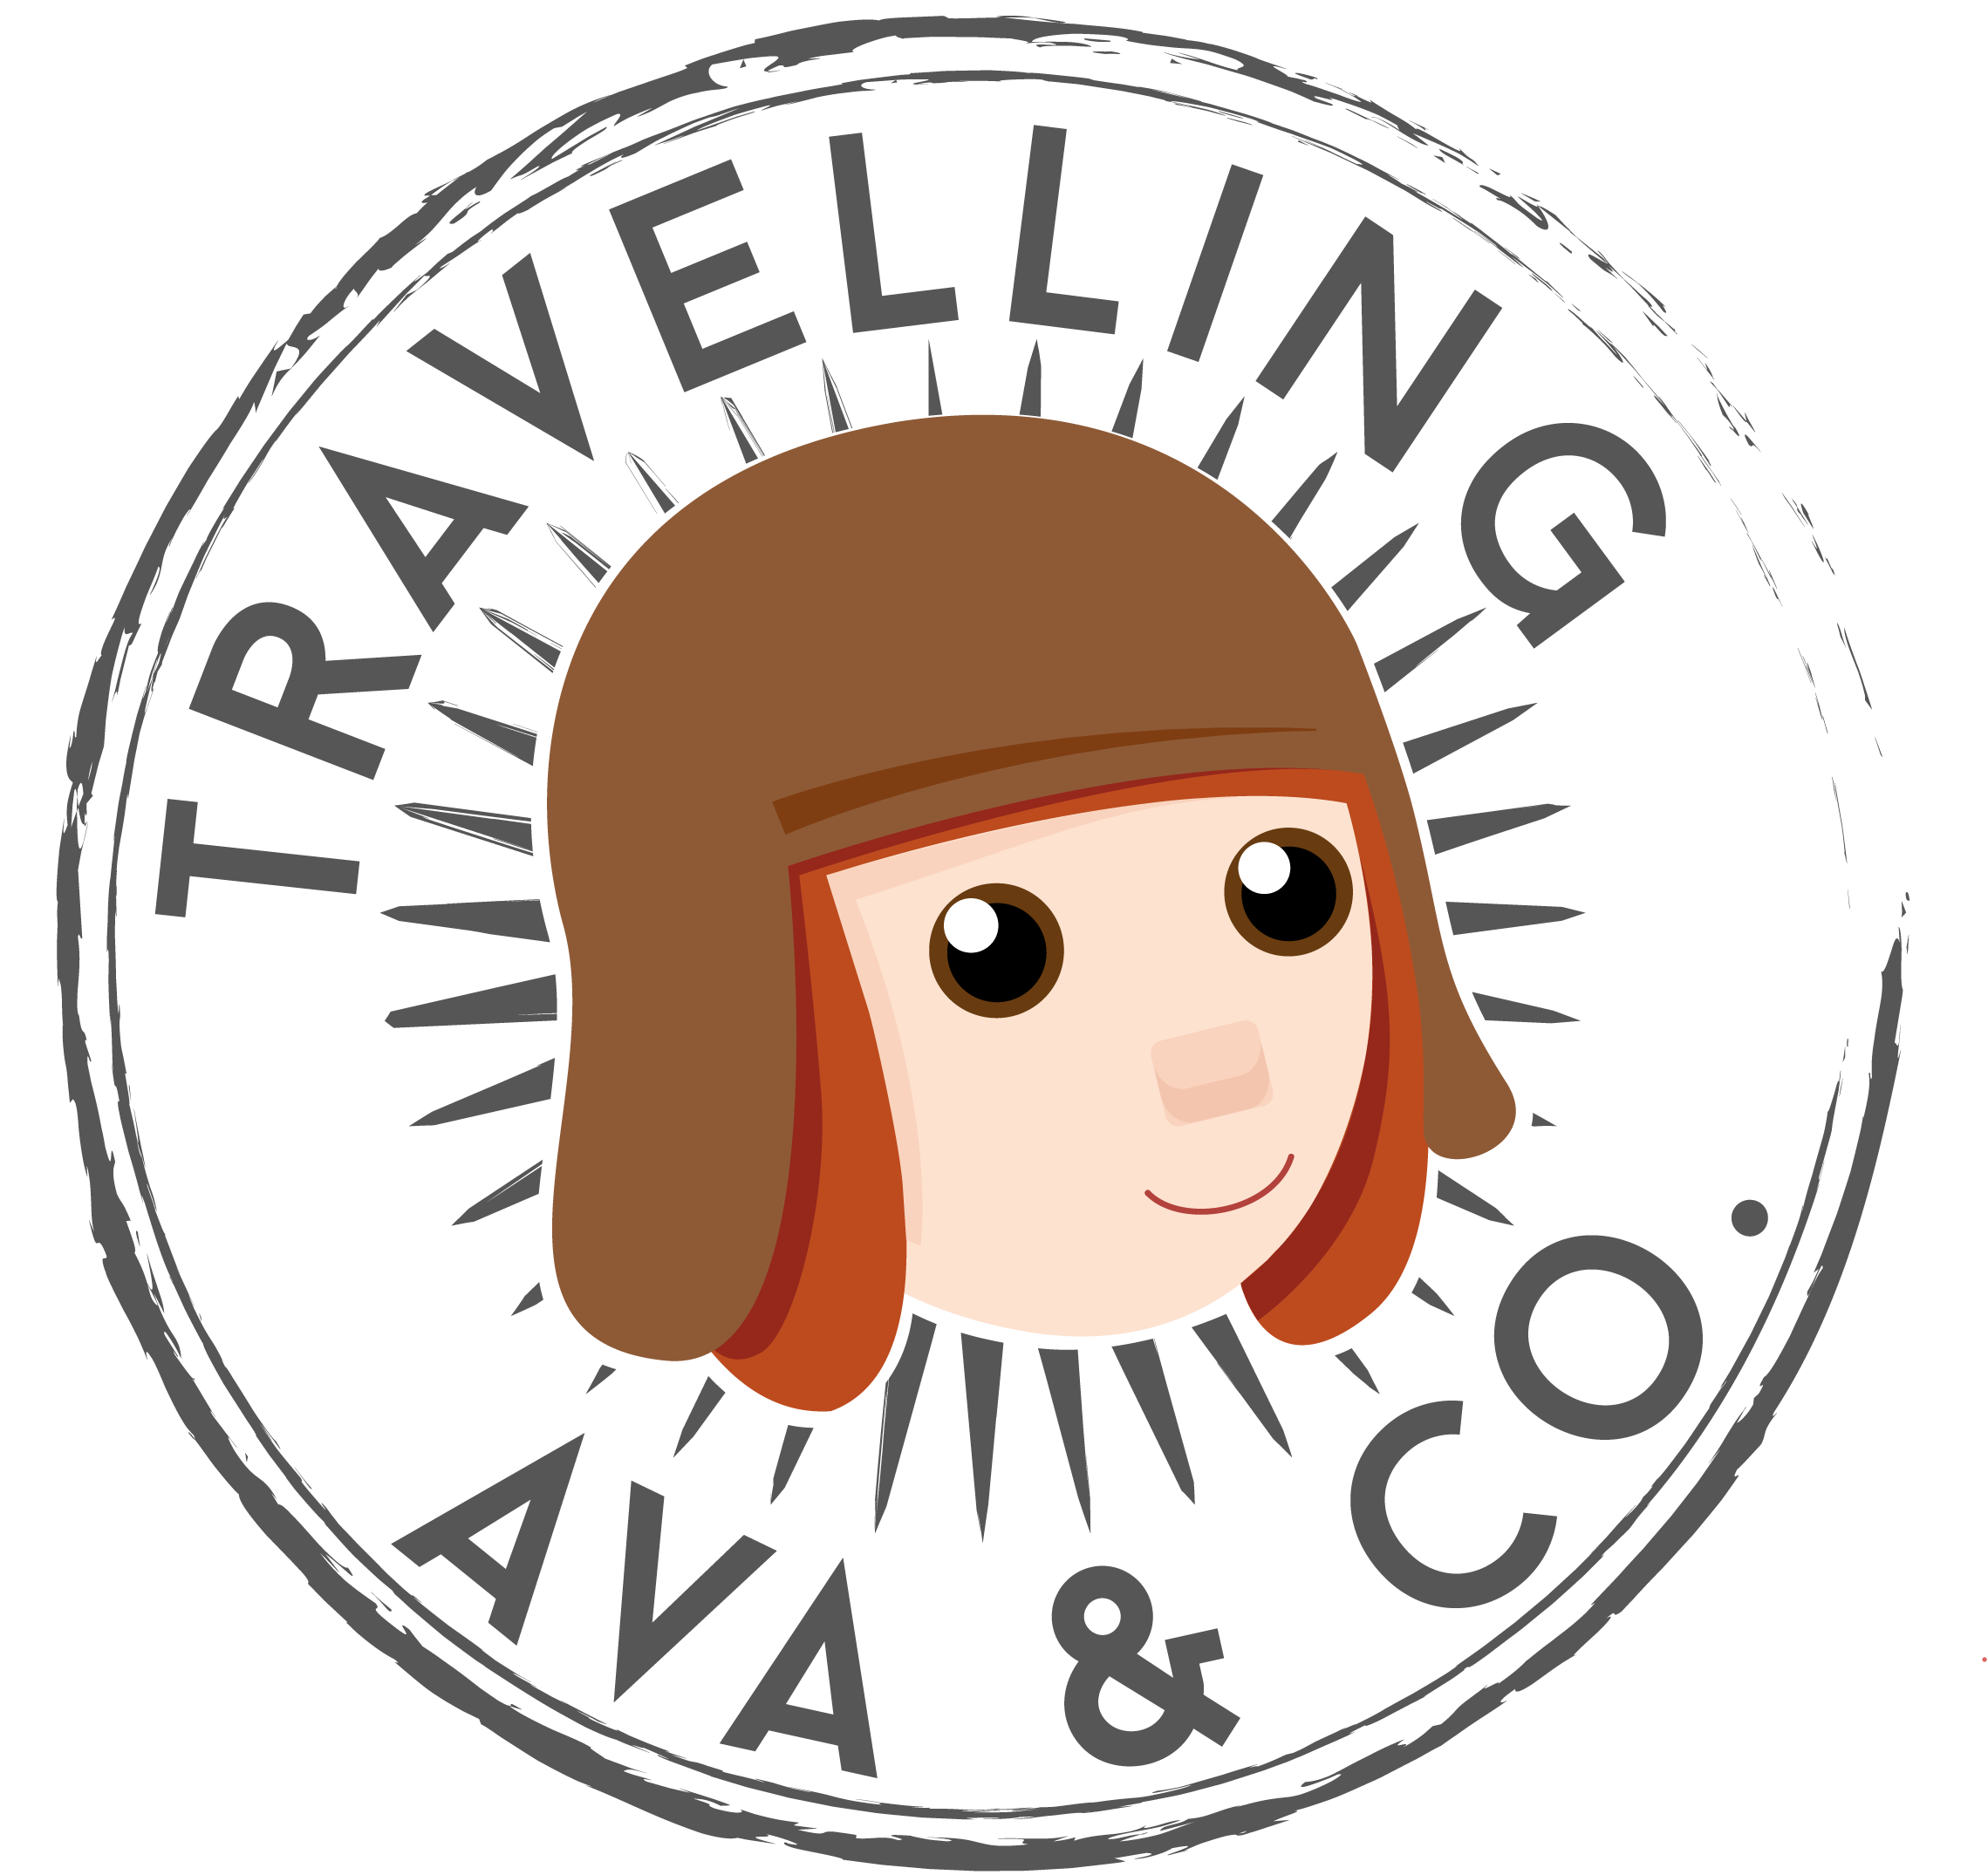 Travelling Ava and Co.